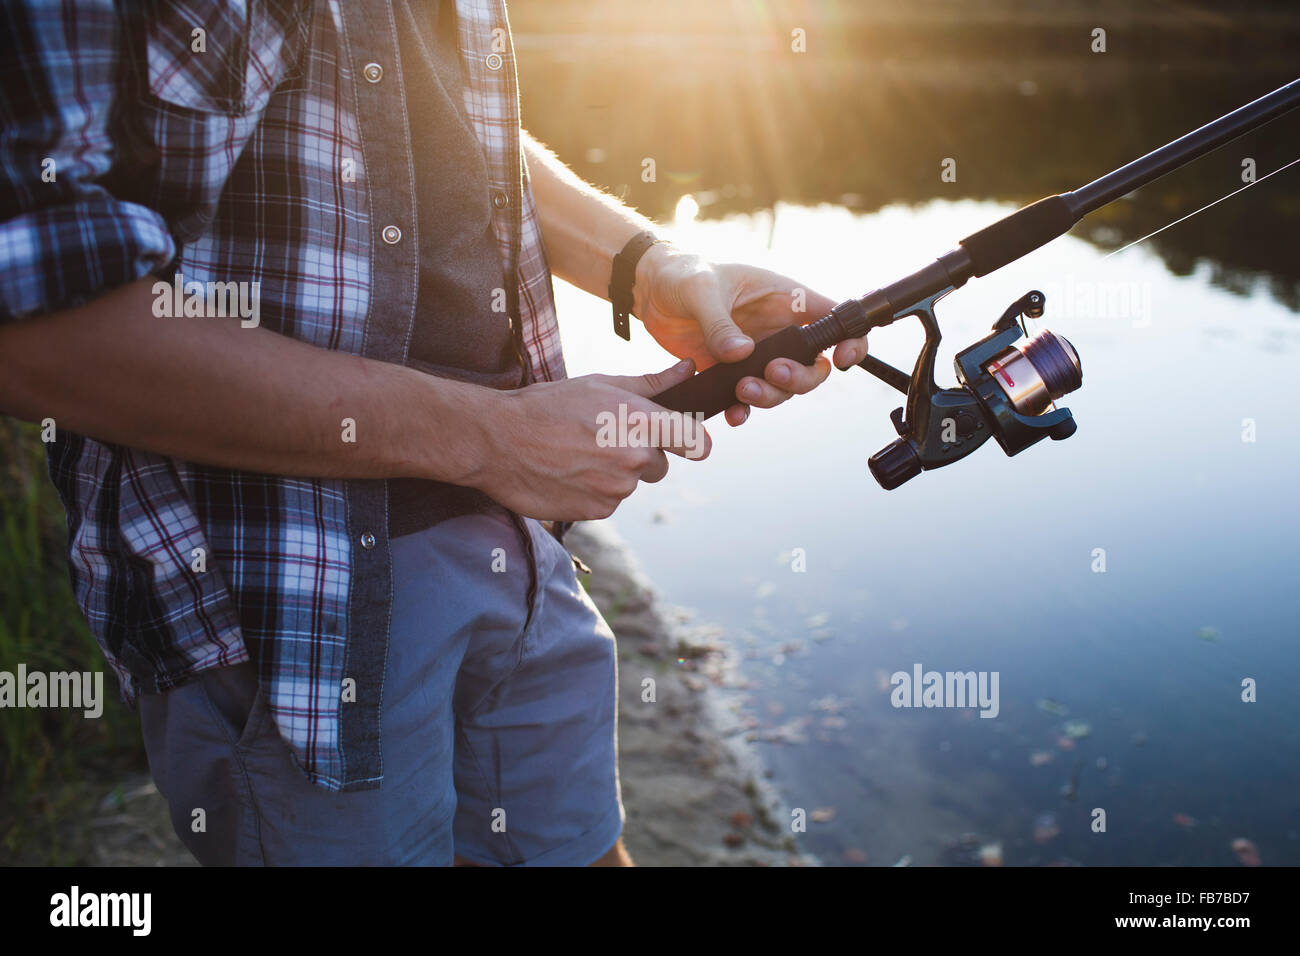 Midsection of man fishing at lakeshore in forest Stock Photo